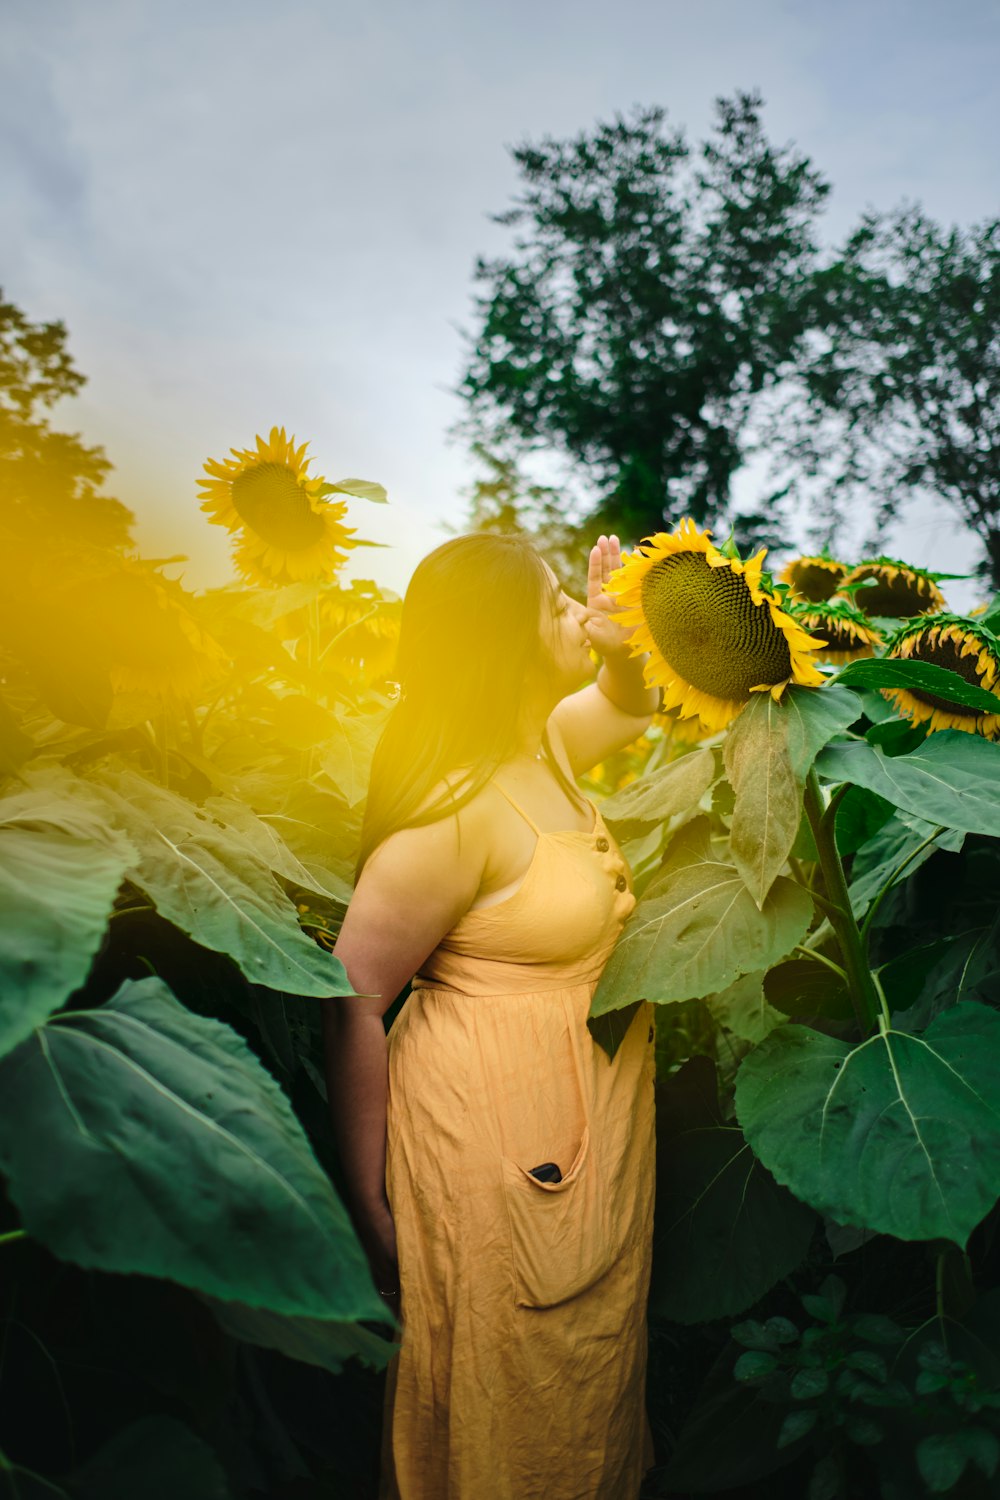 person holding yellow sunflower during daytime